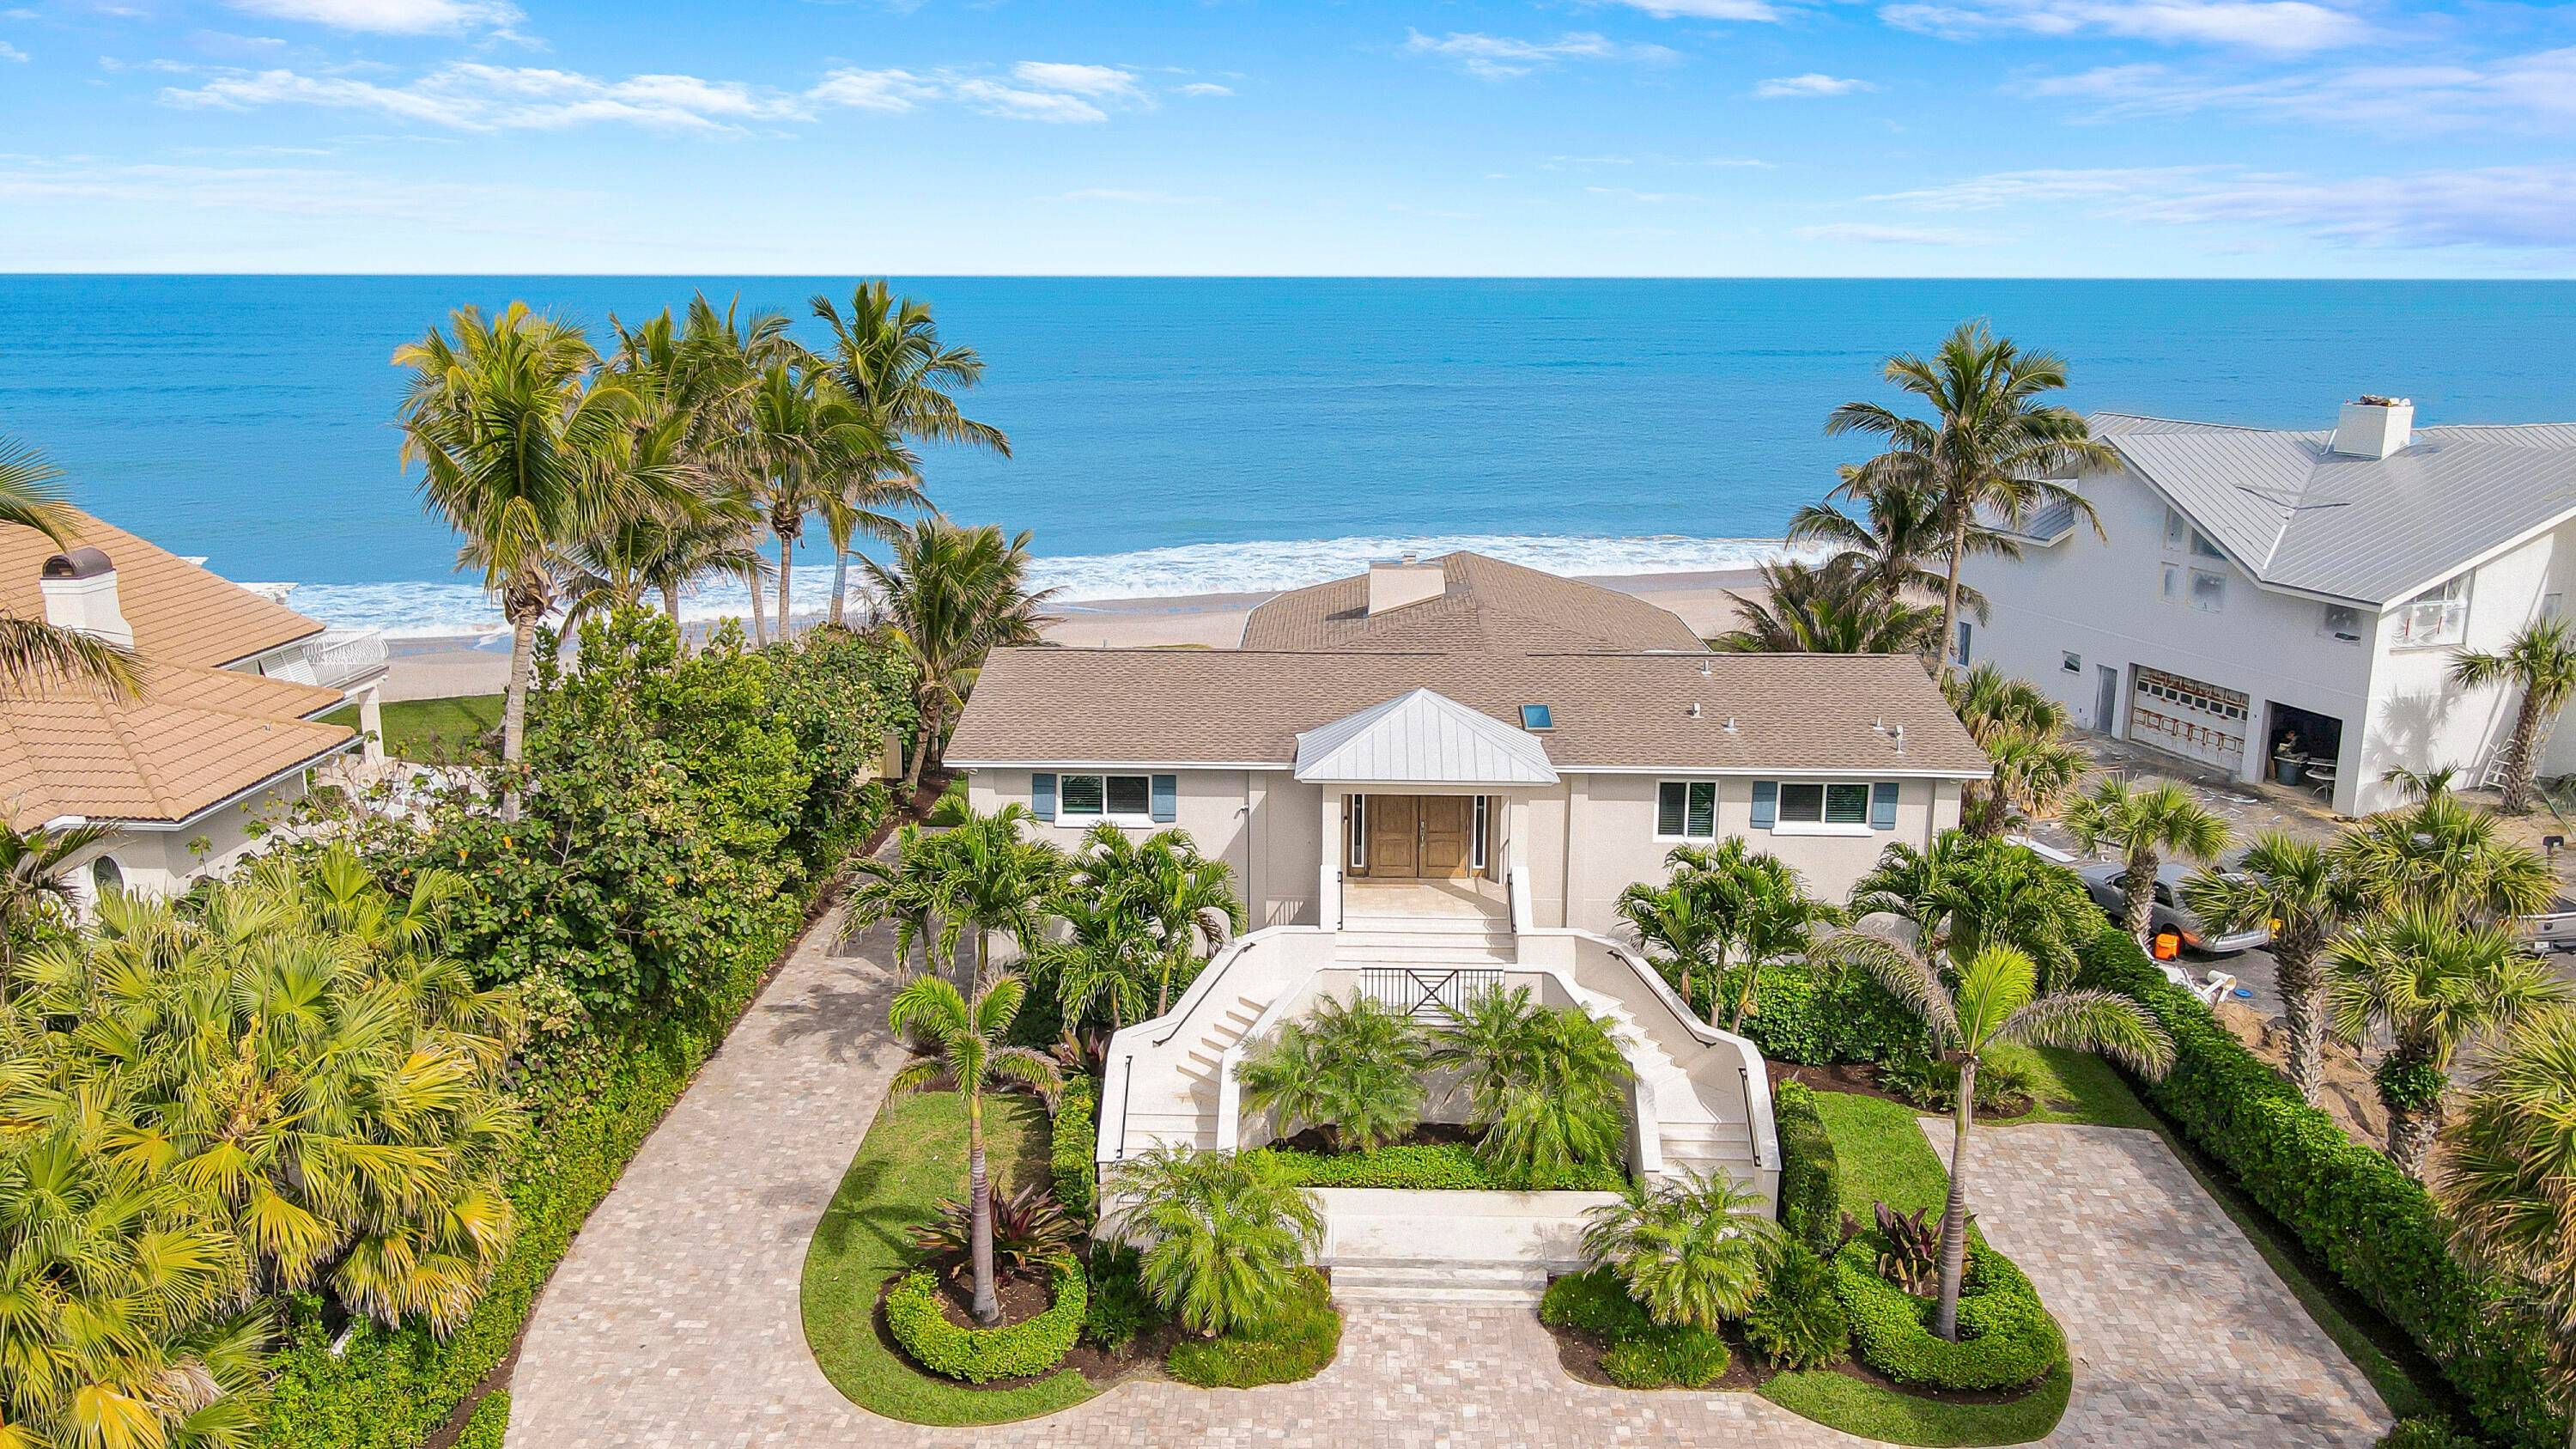 Experience oceanfront living at its finest with this beautiful home in the quiet, beachside town of Indian River Shores.